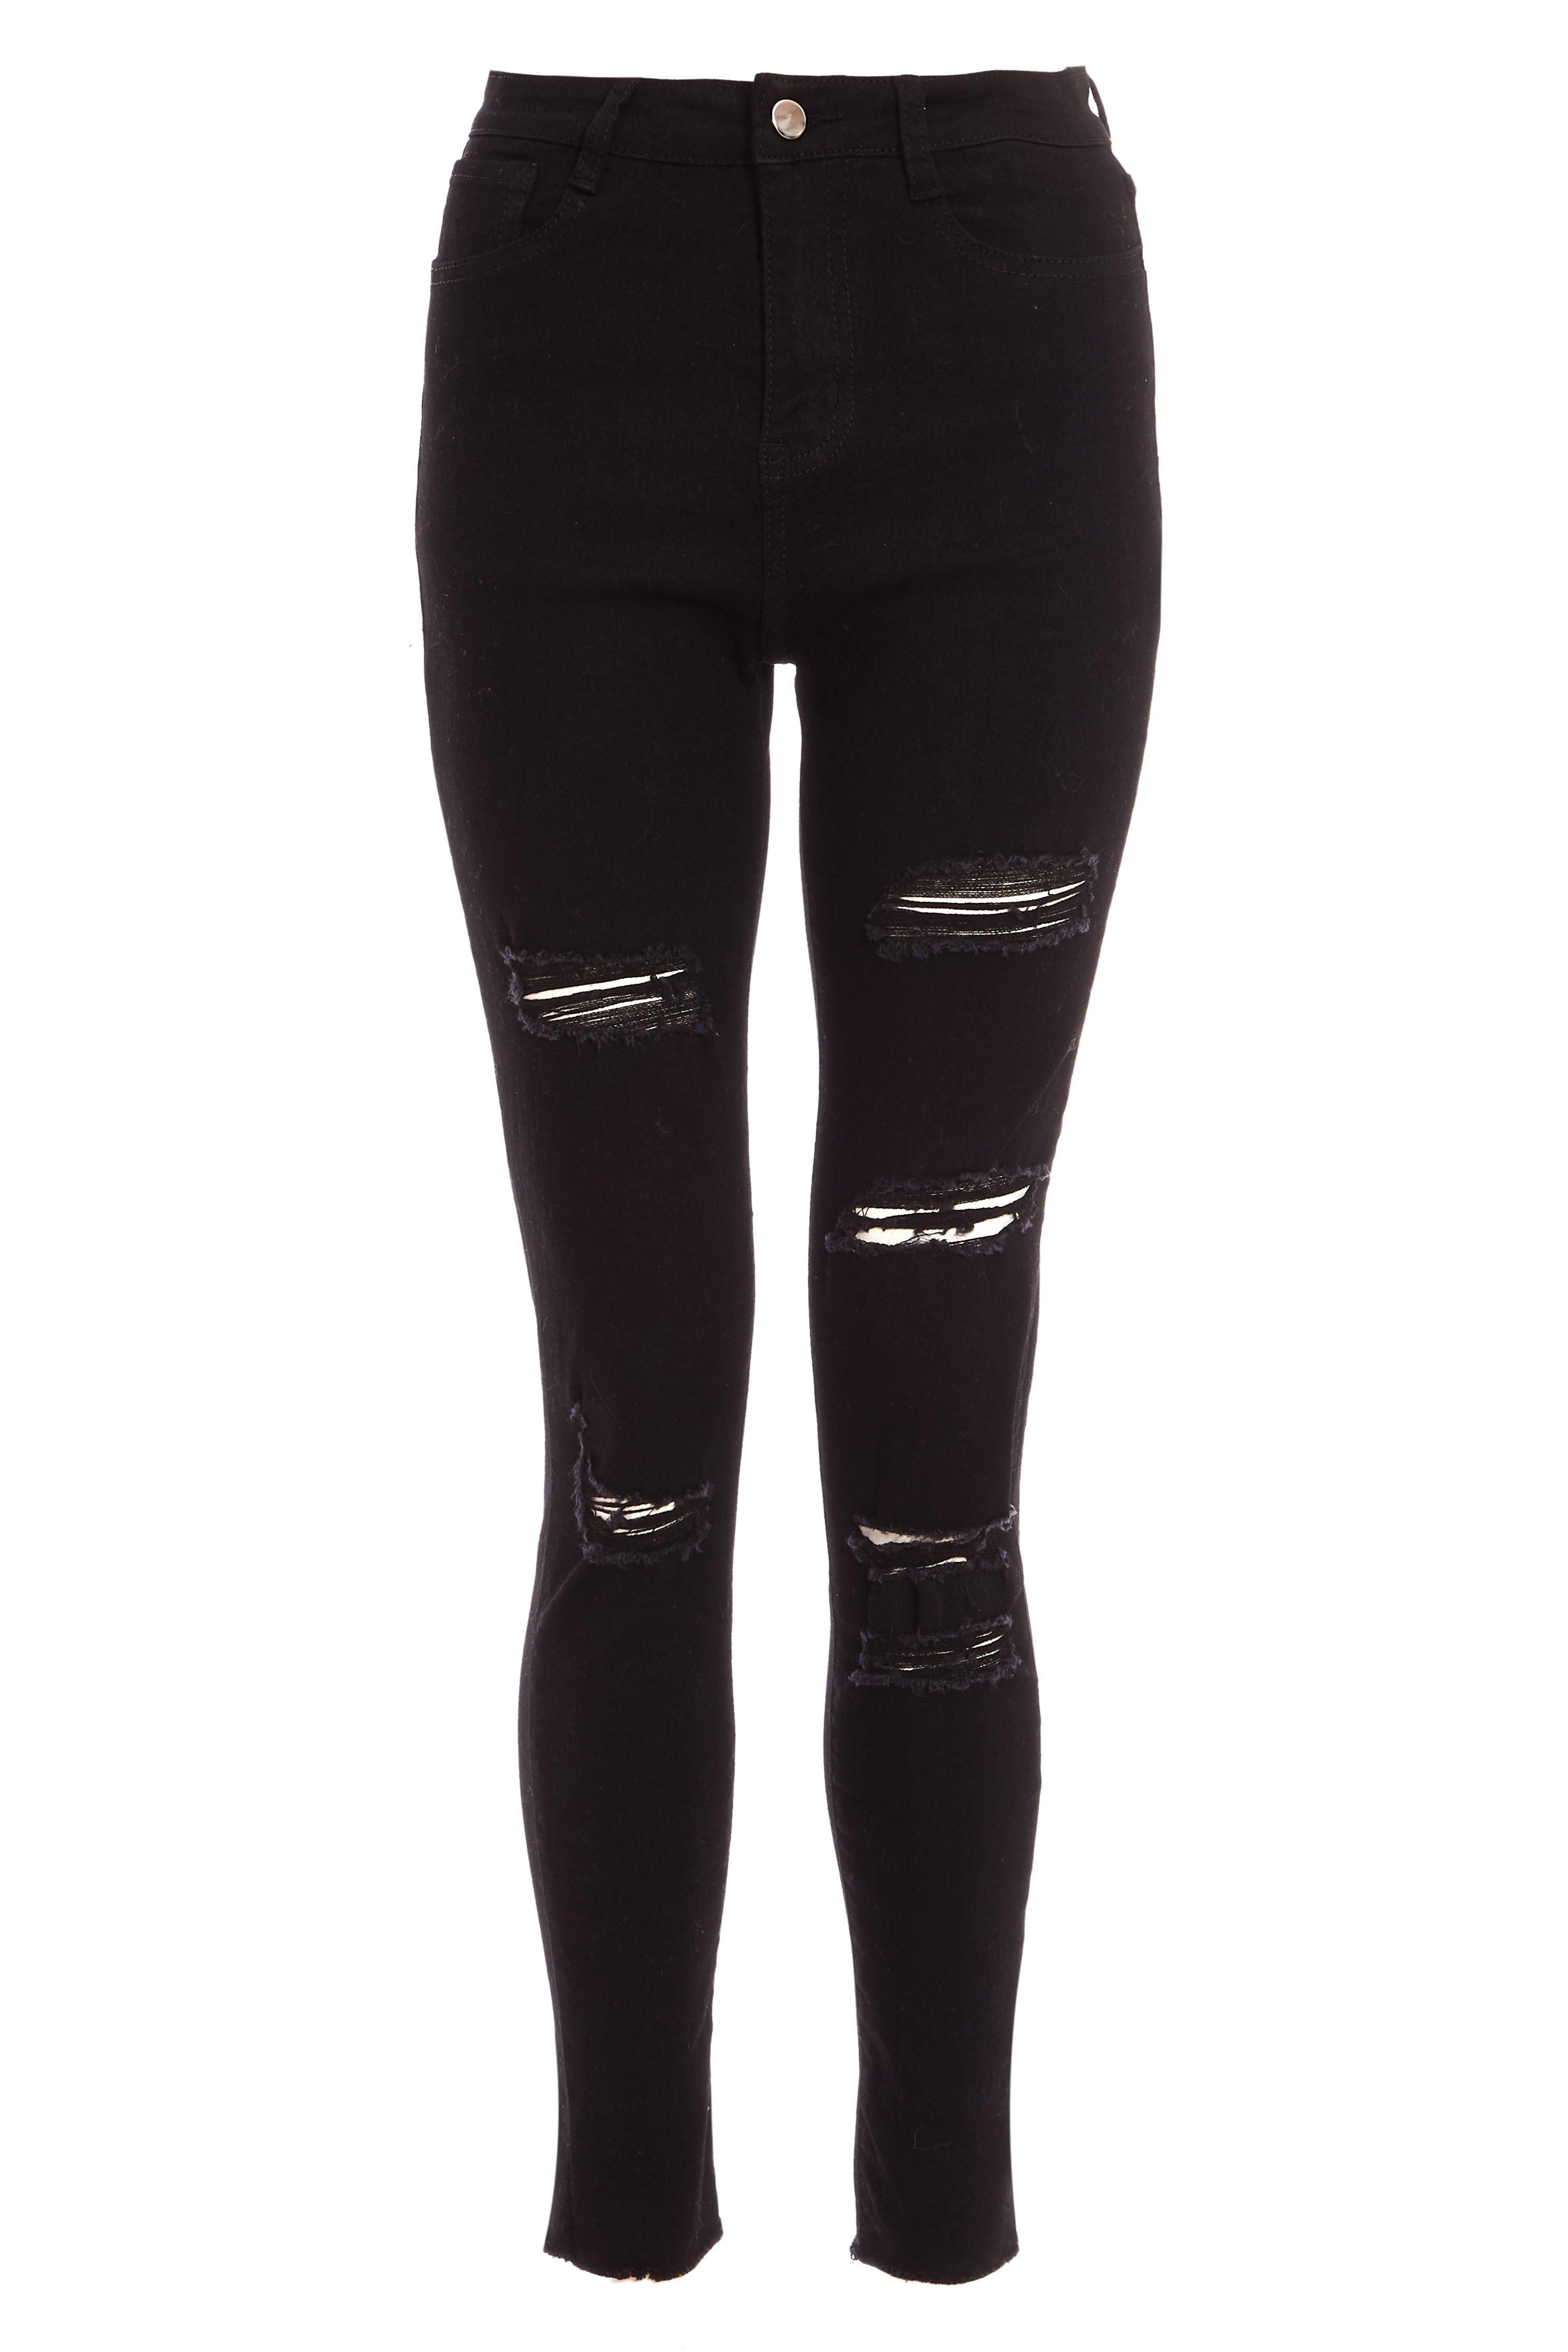 Black Ripped Skinny Jeans - Quiz Clothing